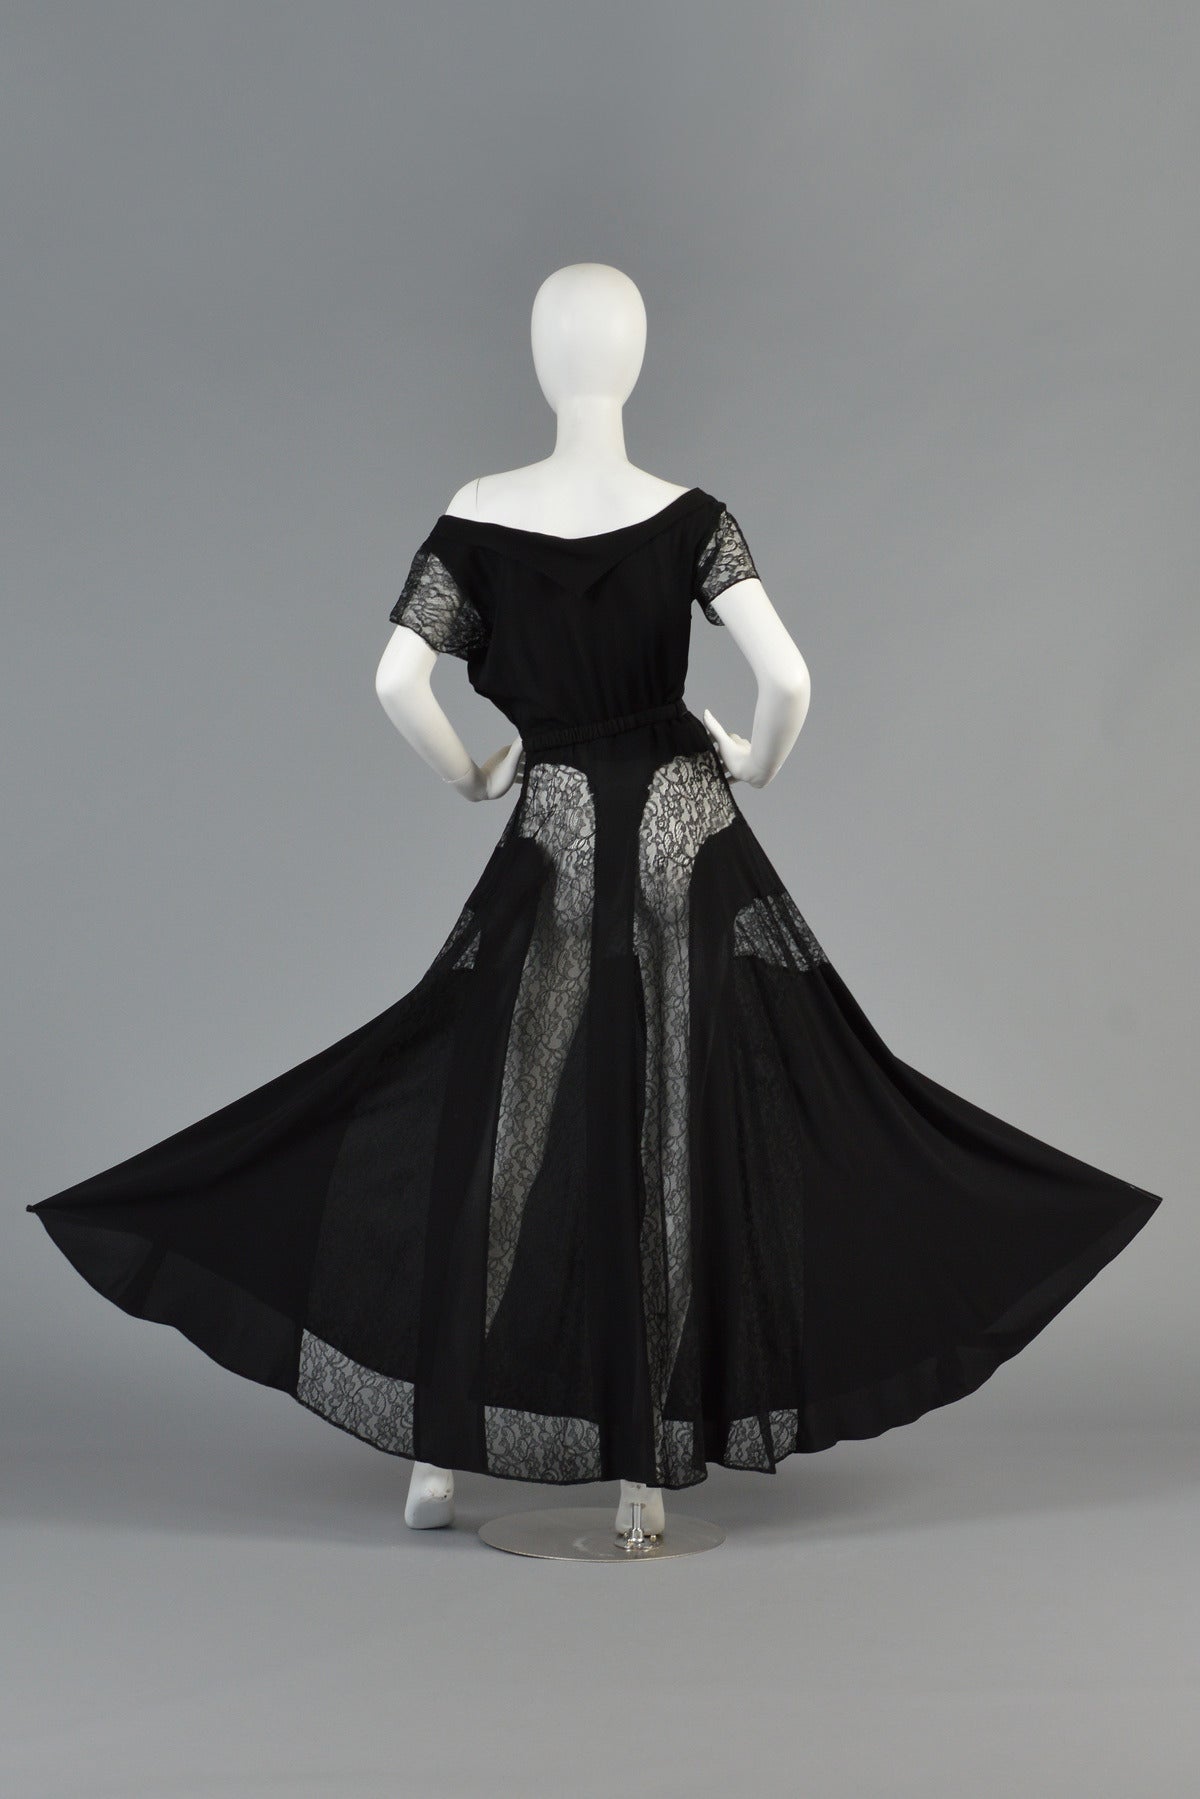 Beautiful 1940's black rayon crepe evening dress with lace inserts. Such a gorgeous piece!

Dress features a wide scoop neck with short lace sleeves and full skirt. Daring sheer lace panels are laid horizontally across the front and fall into